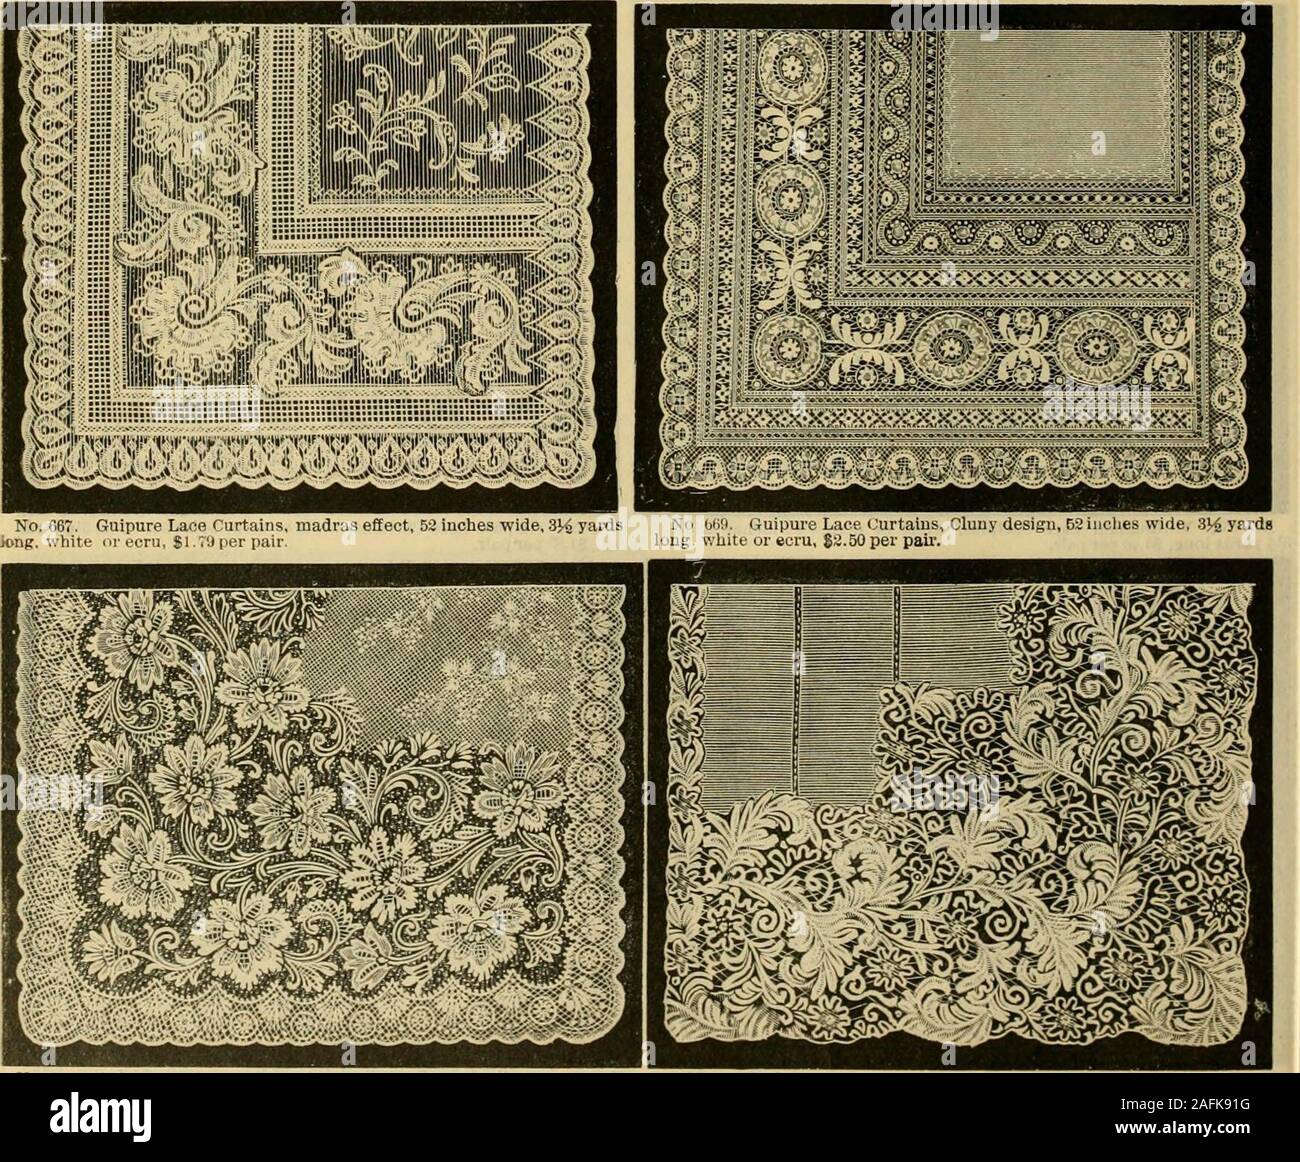 . Fall and Winter, 1890-91 Fashion Catalogue / H. O'Neill and Co.. No. 663. Guipure Lace Curtains white or ecru, 51 inches wide, 3hi yardsjQUg, $1.98 per pair. .* .. iju ?- i..di(&gt;uie Lace t urtaiii^, wliite ur ecru, 58iuclies viue, r^L^ yardsluug. S1.8U per pair. mm ???3V. MM !i.;i:!:S-&gt;i Sijliis^s^^^ mmMm. No. 671 Giiiiiure Lace Curtains, white or ecru, 00 inches wide, 3H yardslong, $3.85 per pair. Nil 073. E.^tra Heavy Guipure Lace Curtains, white or ecru, 00 iuclieiwide, 3!^ yards long, S3.2o per pair, 4 yards long, $3 85 per pair. II SIXTH AVENUE, 20th TO 2 1st STREET, NEW YORK. 7 Stock Photo